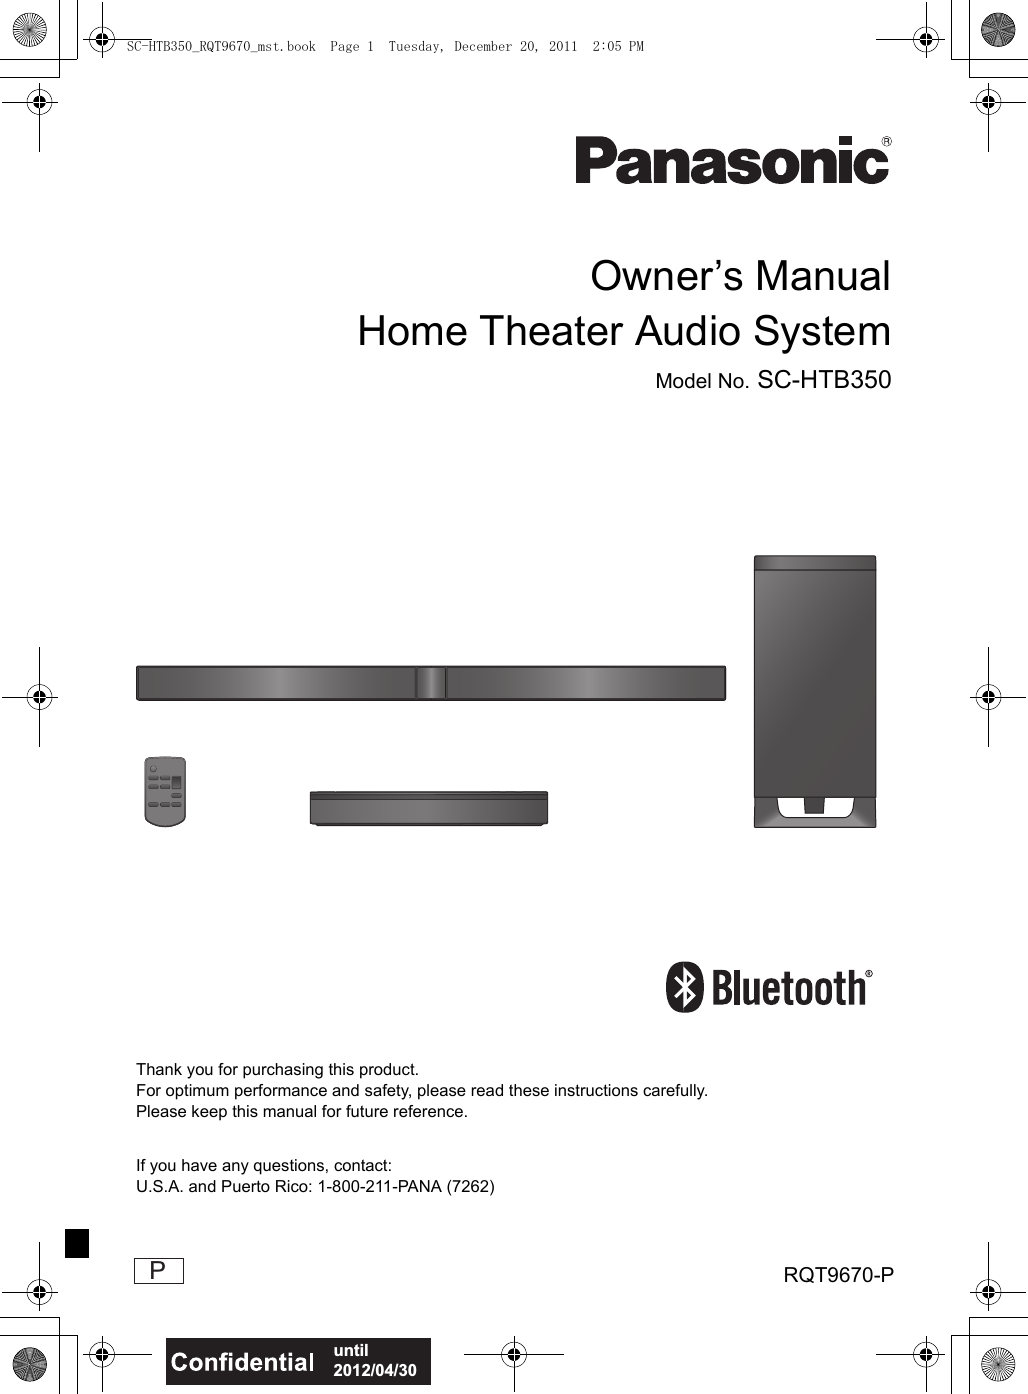 until 2012/04/30Owner’s ManualHome Theater Audio SystemModel No. SC-HTB350 PThank you for purchasing this product.For optimum performance and safety, please read these instructions carefully.Please keep this manual for future reference.If you have any questions, contact:U.S.A. and Puerto Rico: 1-800-211-PANA (7262)RQT9670-PSC-HTB350_RQT9670_mst.book  Page 1  Tuesday, December 20, 2011  2:05 PM